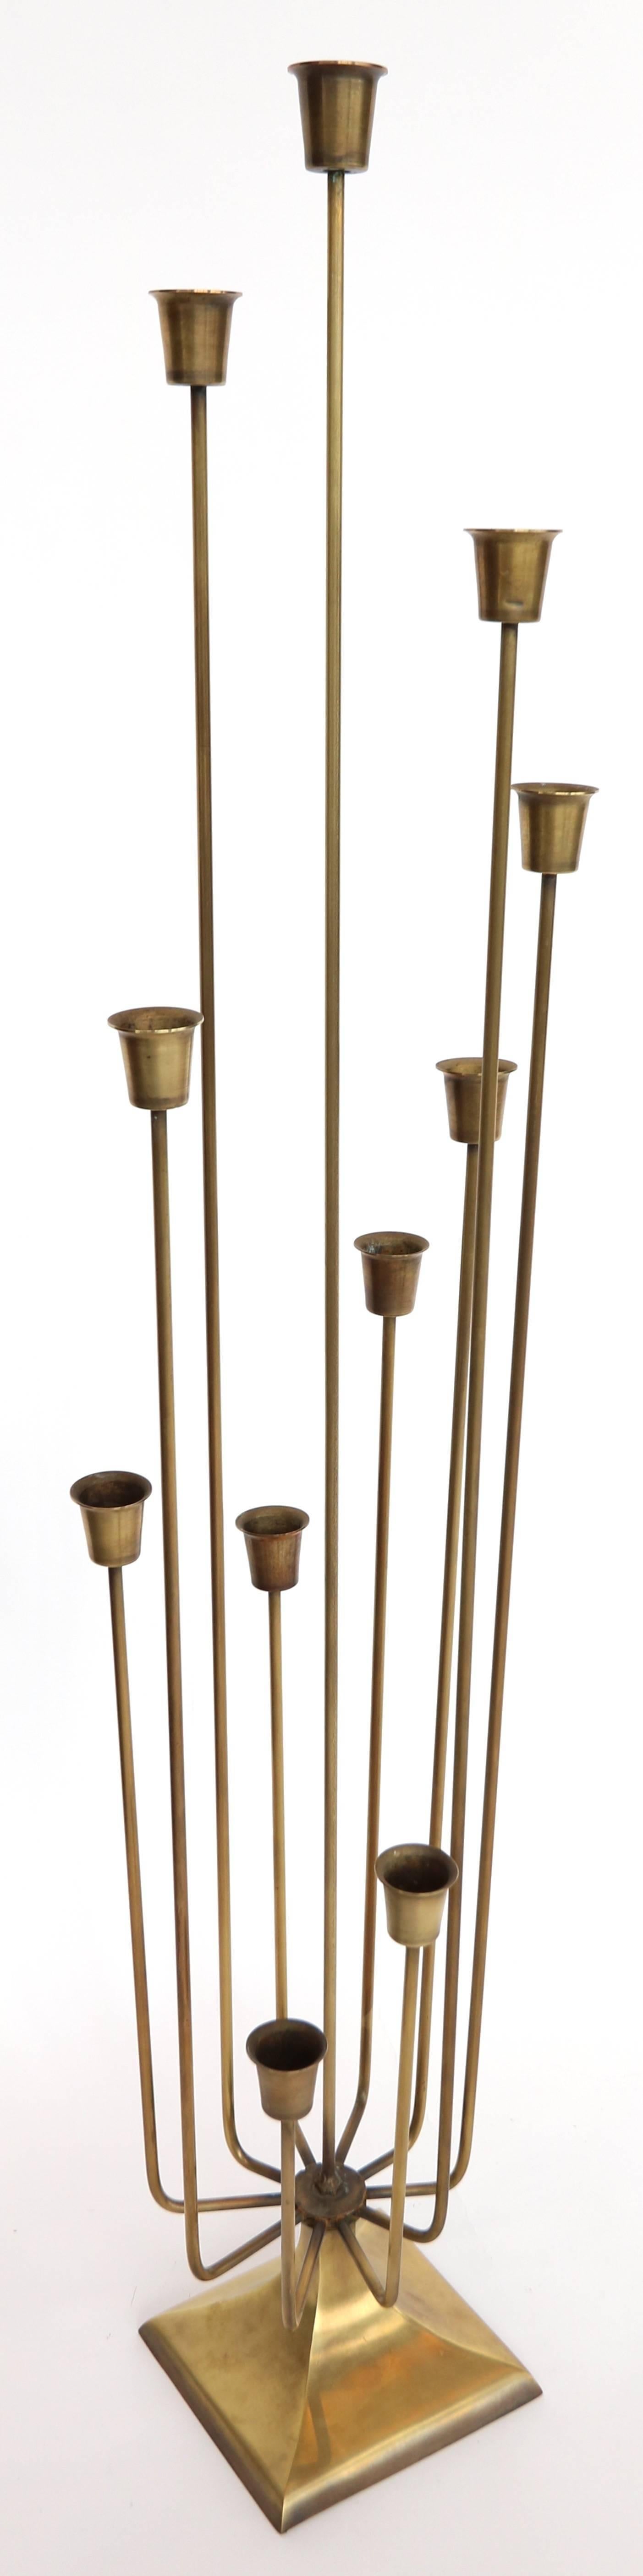 Pair of 1970s brass candleholders with 11 cups.